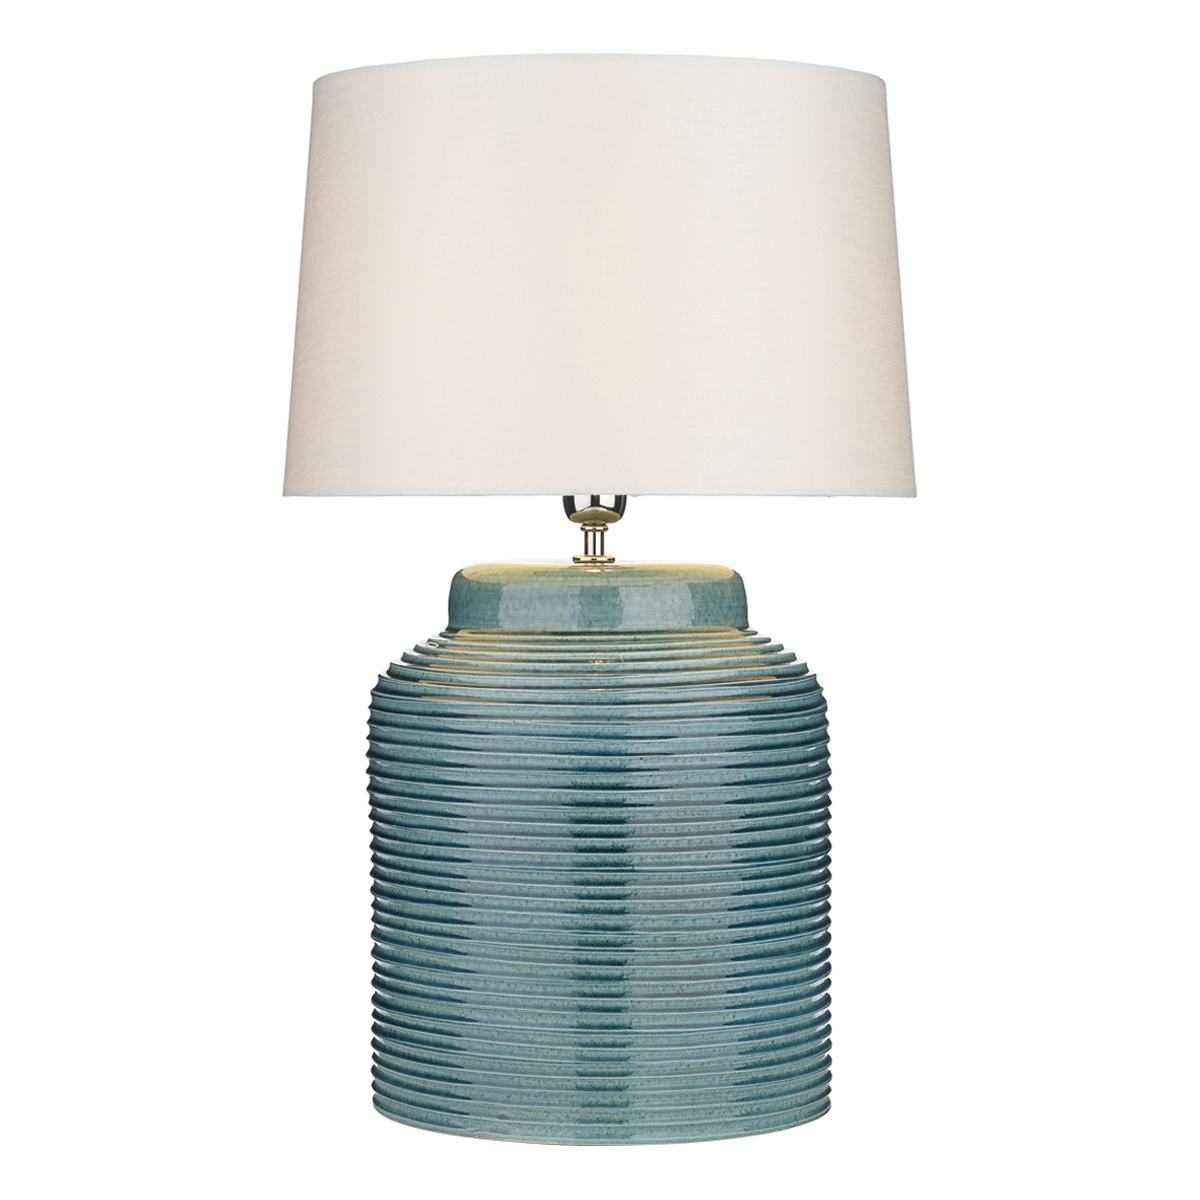 Tidal Table Lamp Ribbed Small Base Only, Gold Lamp Base Only